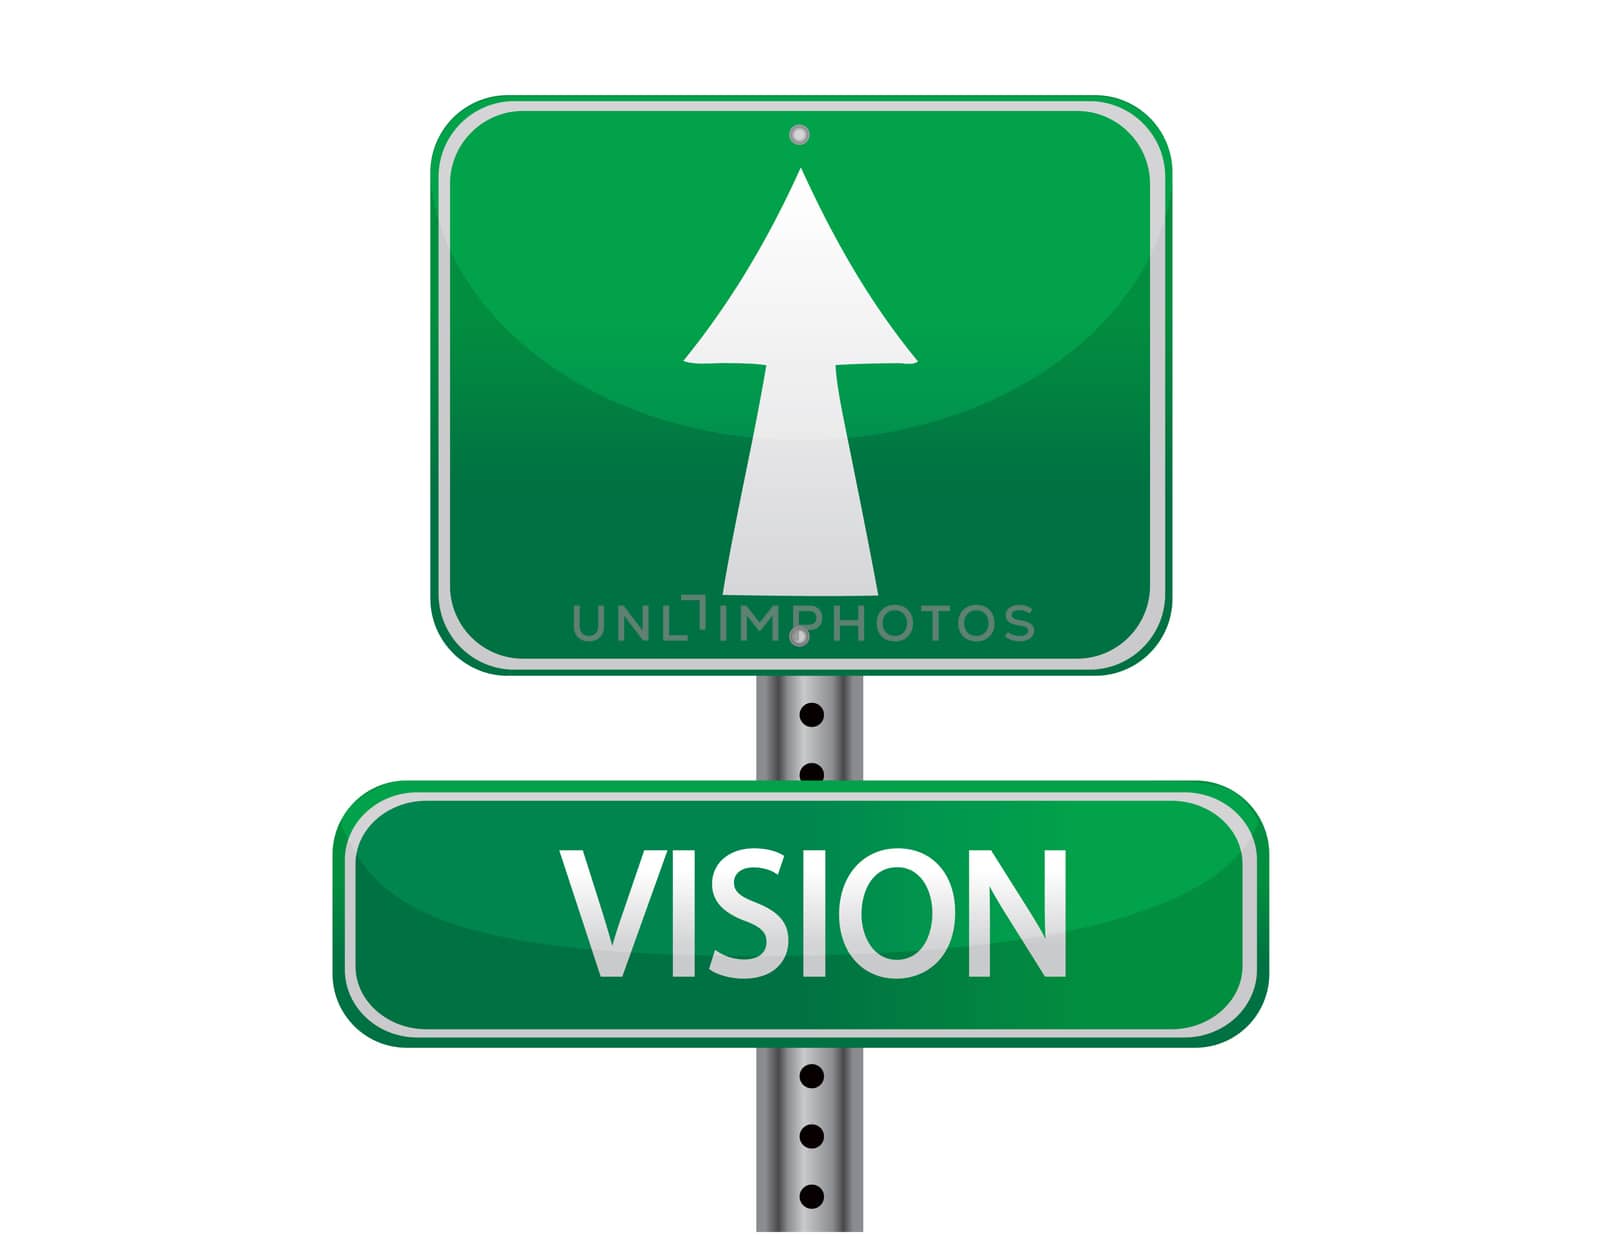 Vision street sign isolated over white